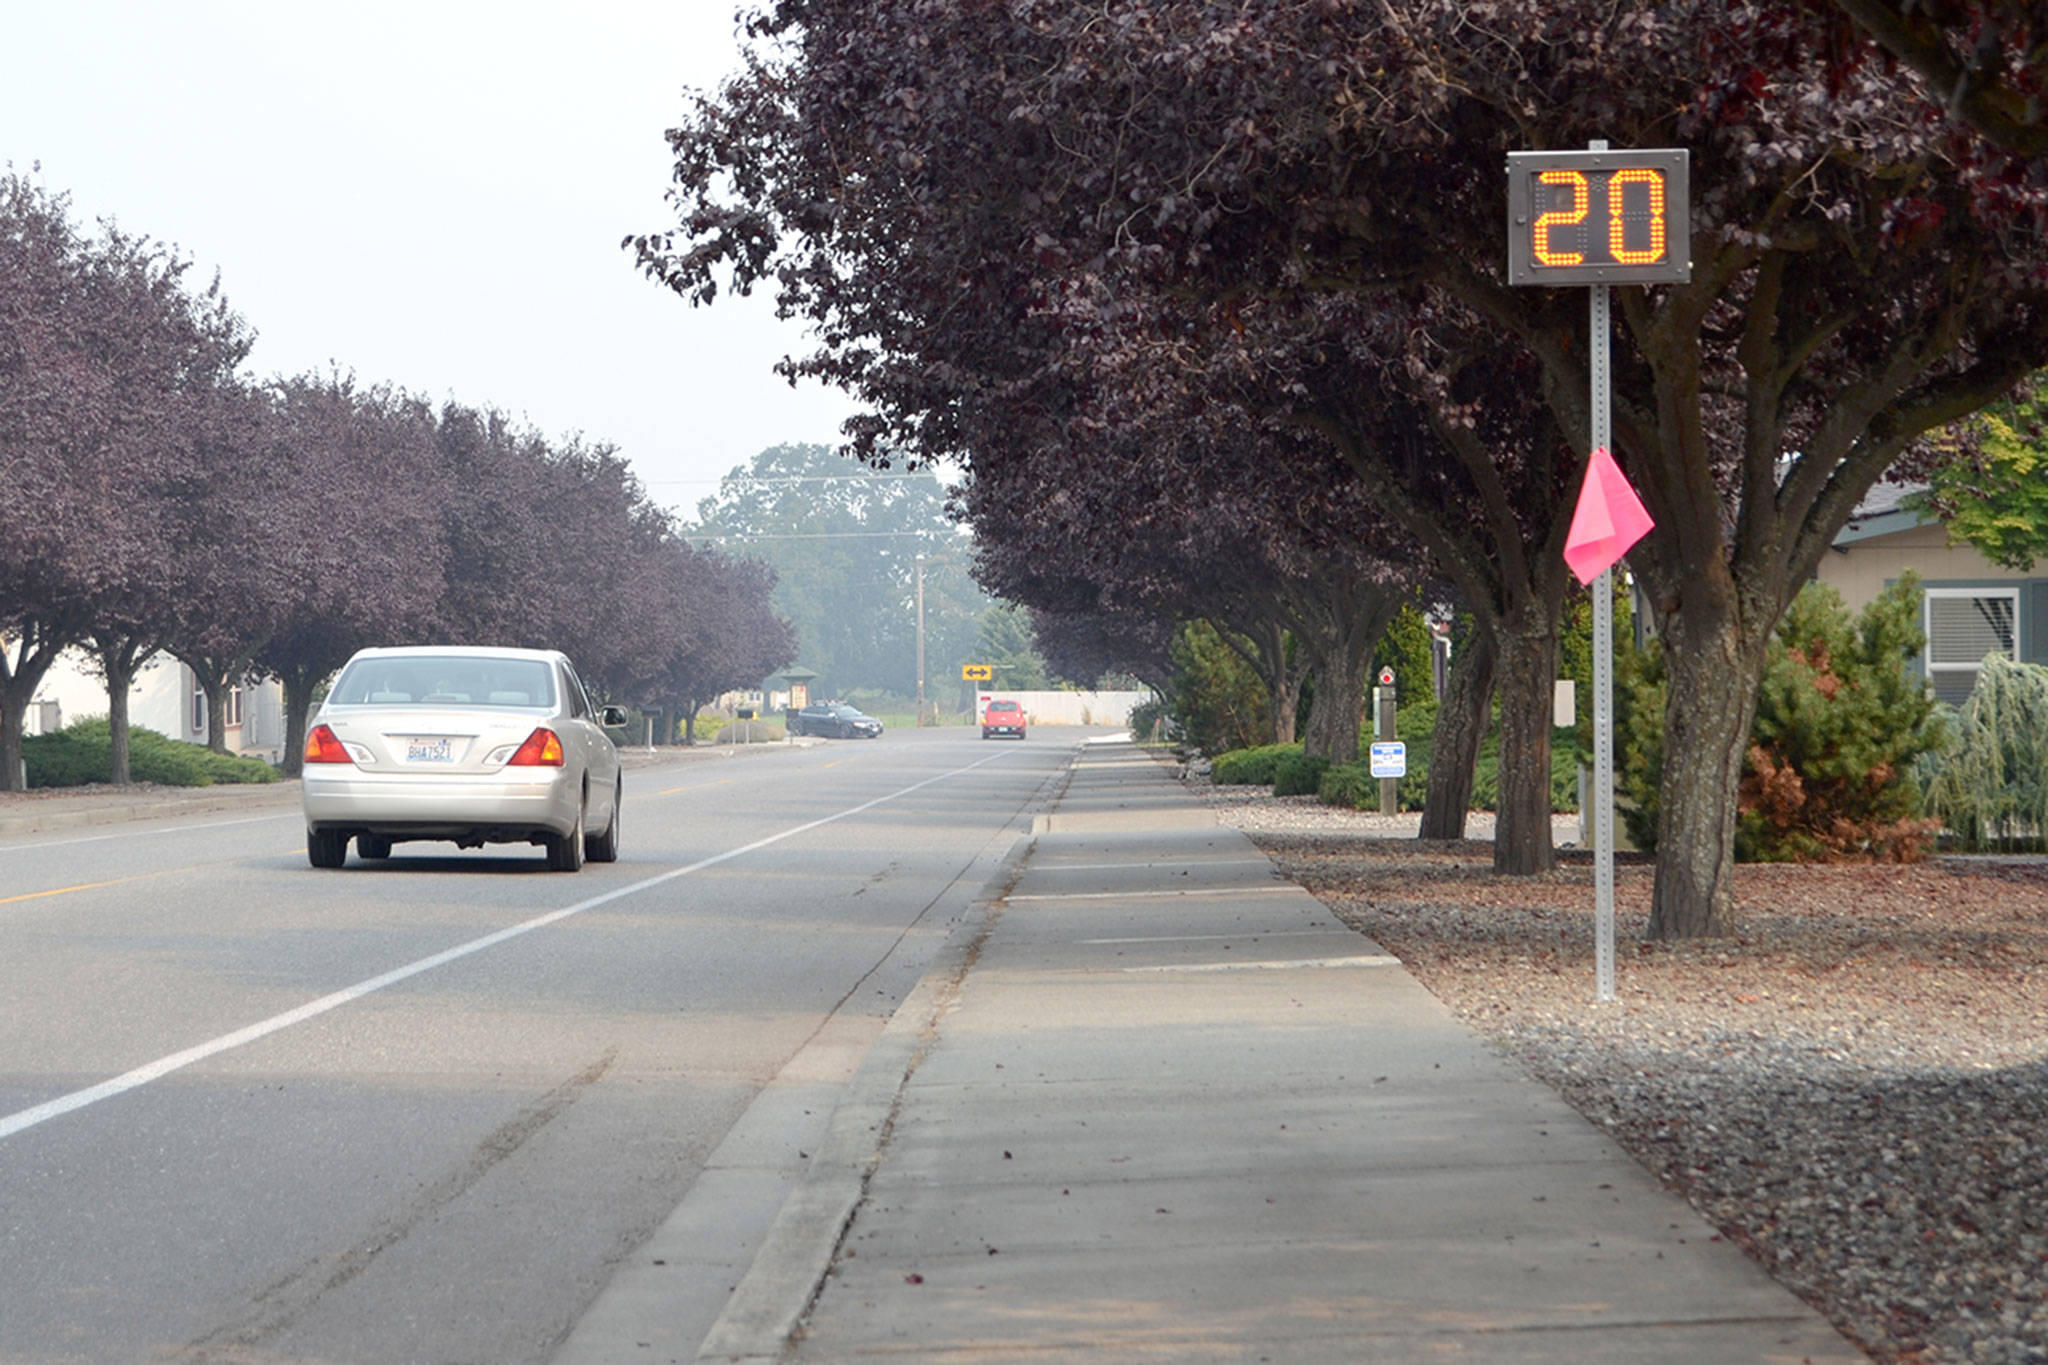 Battery-powered radar signs on Seventh Avenue will be replaced with solar powered signs sometime in October. Staff with the City of Sequim plan to purchase and install 19 new radar signs throughout the city. Sequim Gazette photo by Matthew Nash